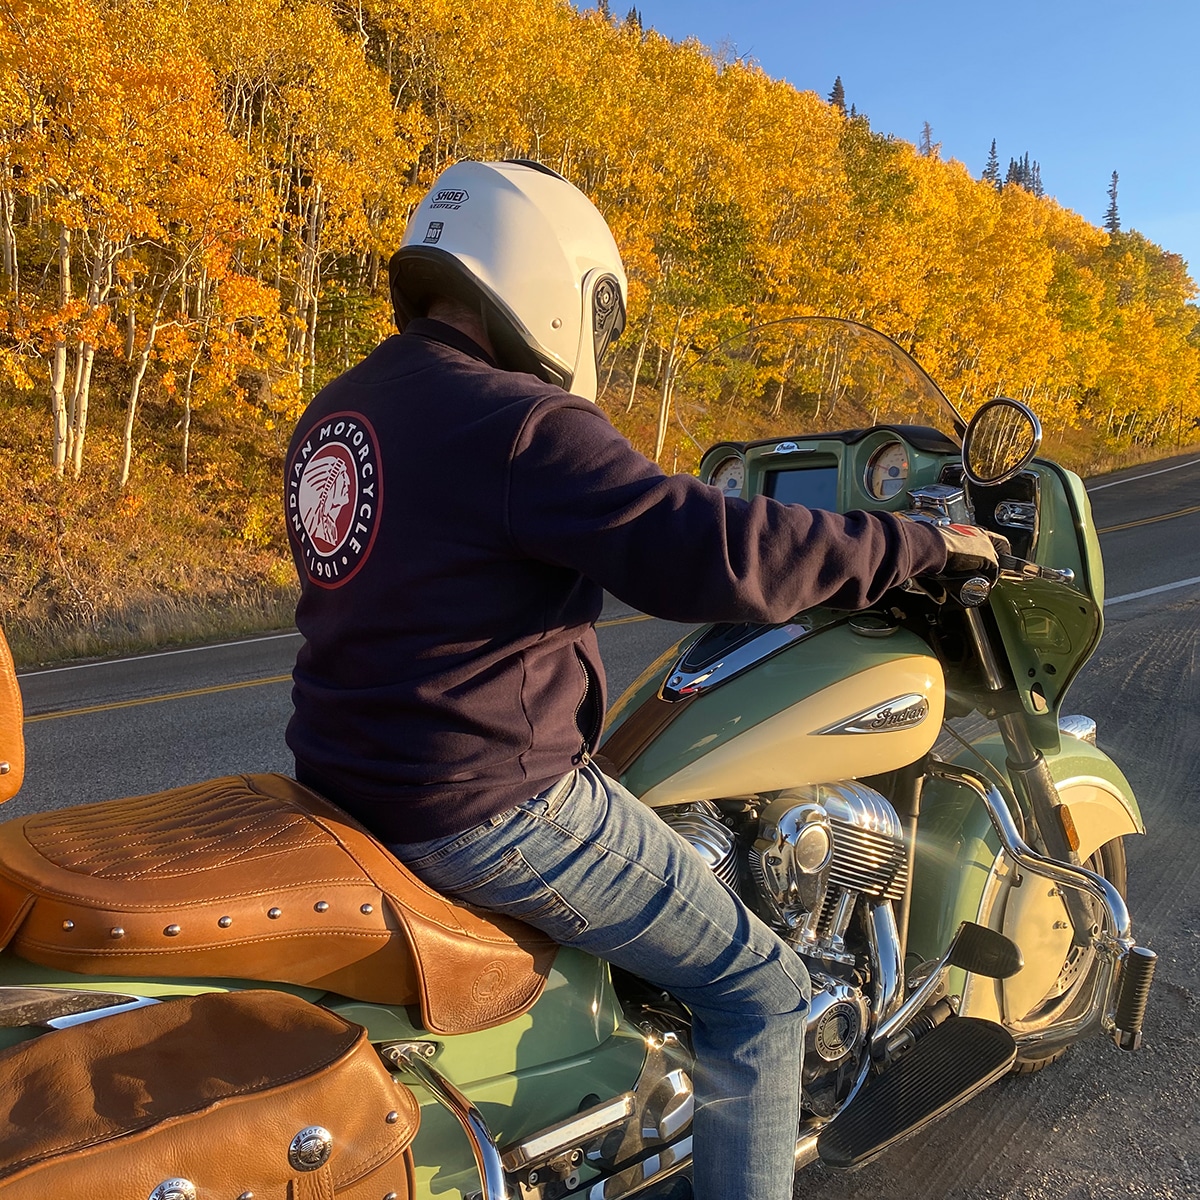 My husband Steve on our Motorcycle near Estes Park, Colorado in the fall.